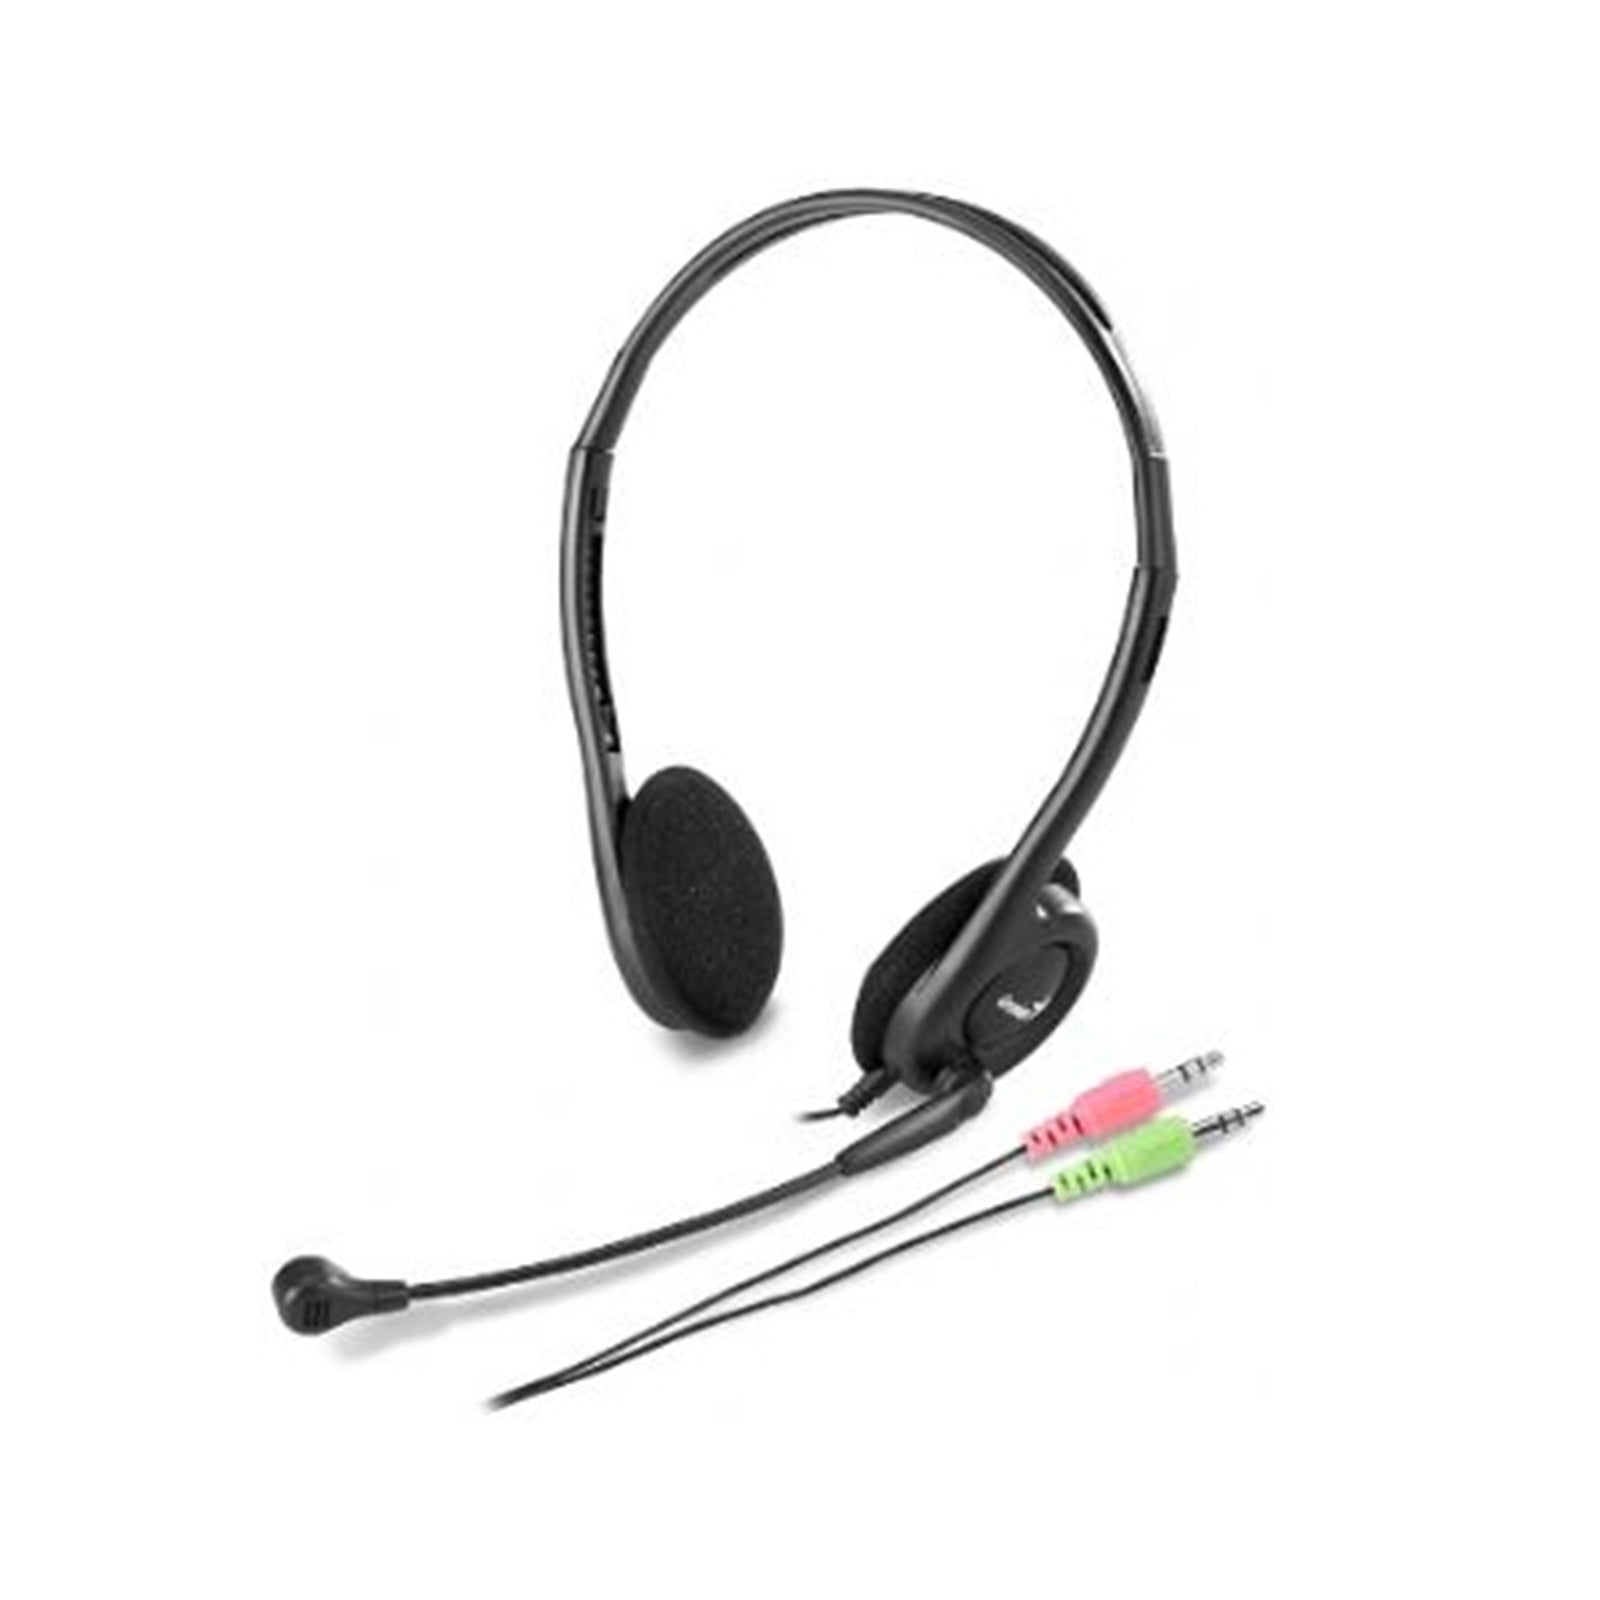 Genius HS-200C Lightweight PC Headset with microphone